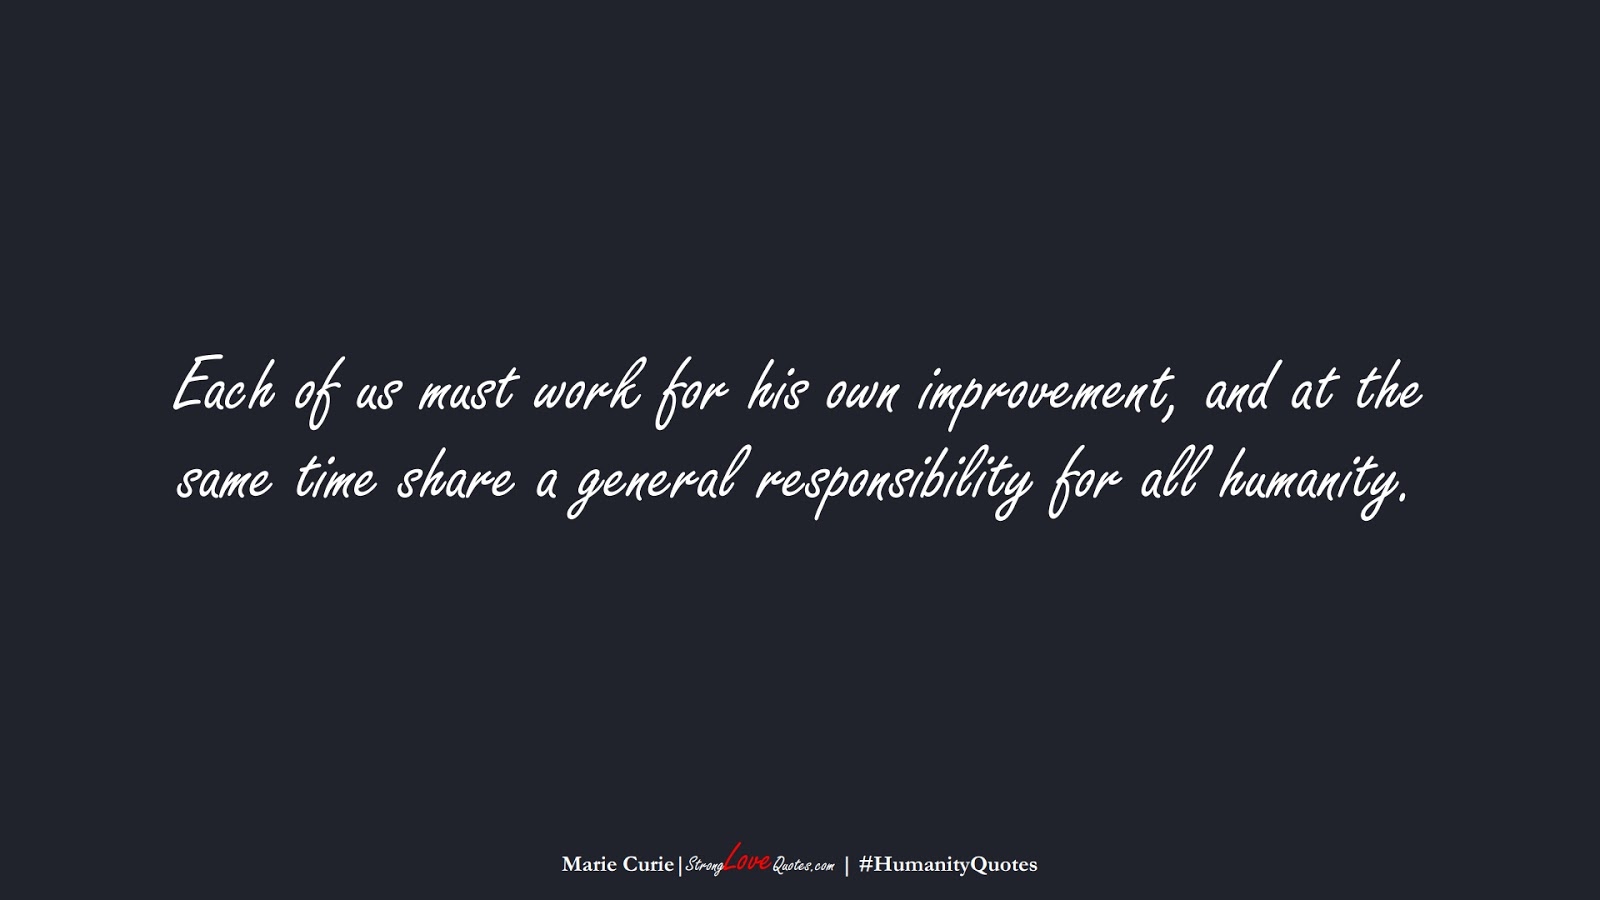 Each of us must work for his own improvement, and at the same time share a general responsibility for all humanity. (Marie Curie);  #HumanityQuotes